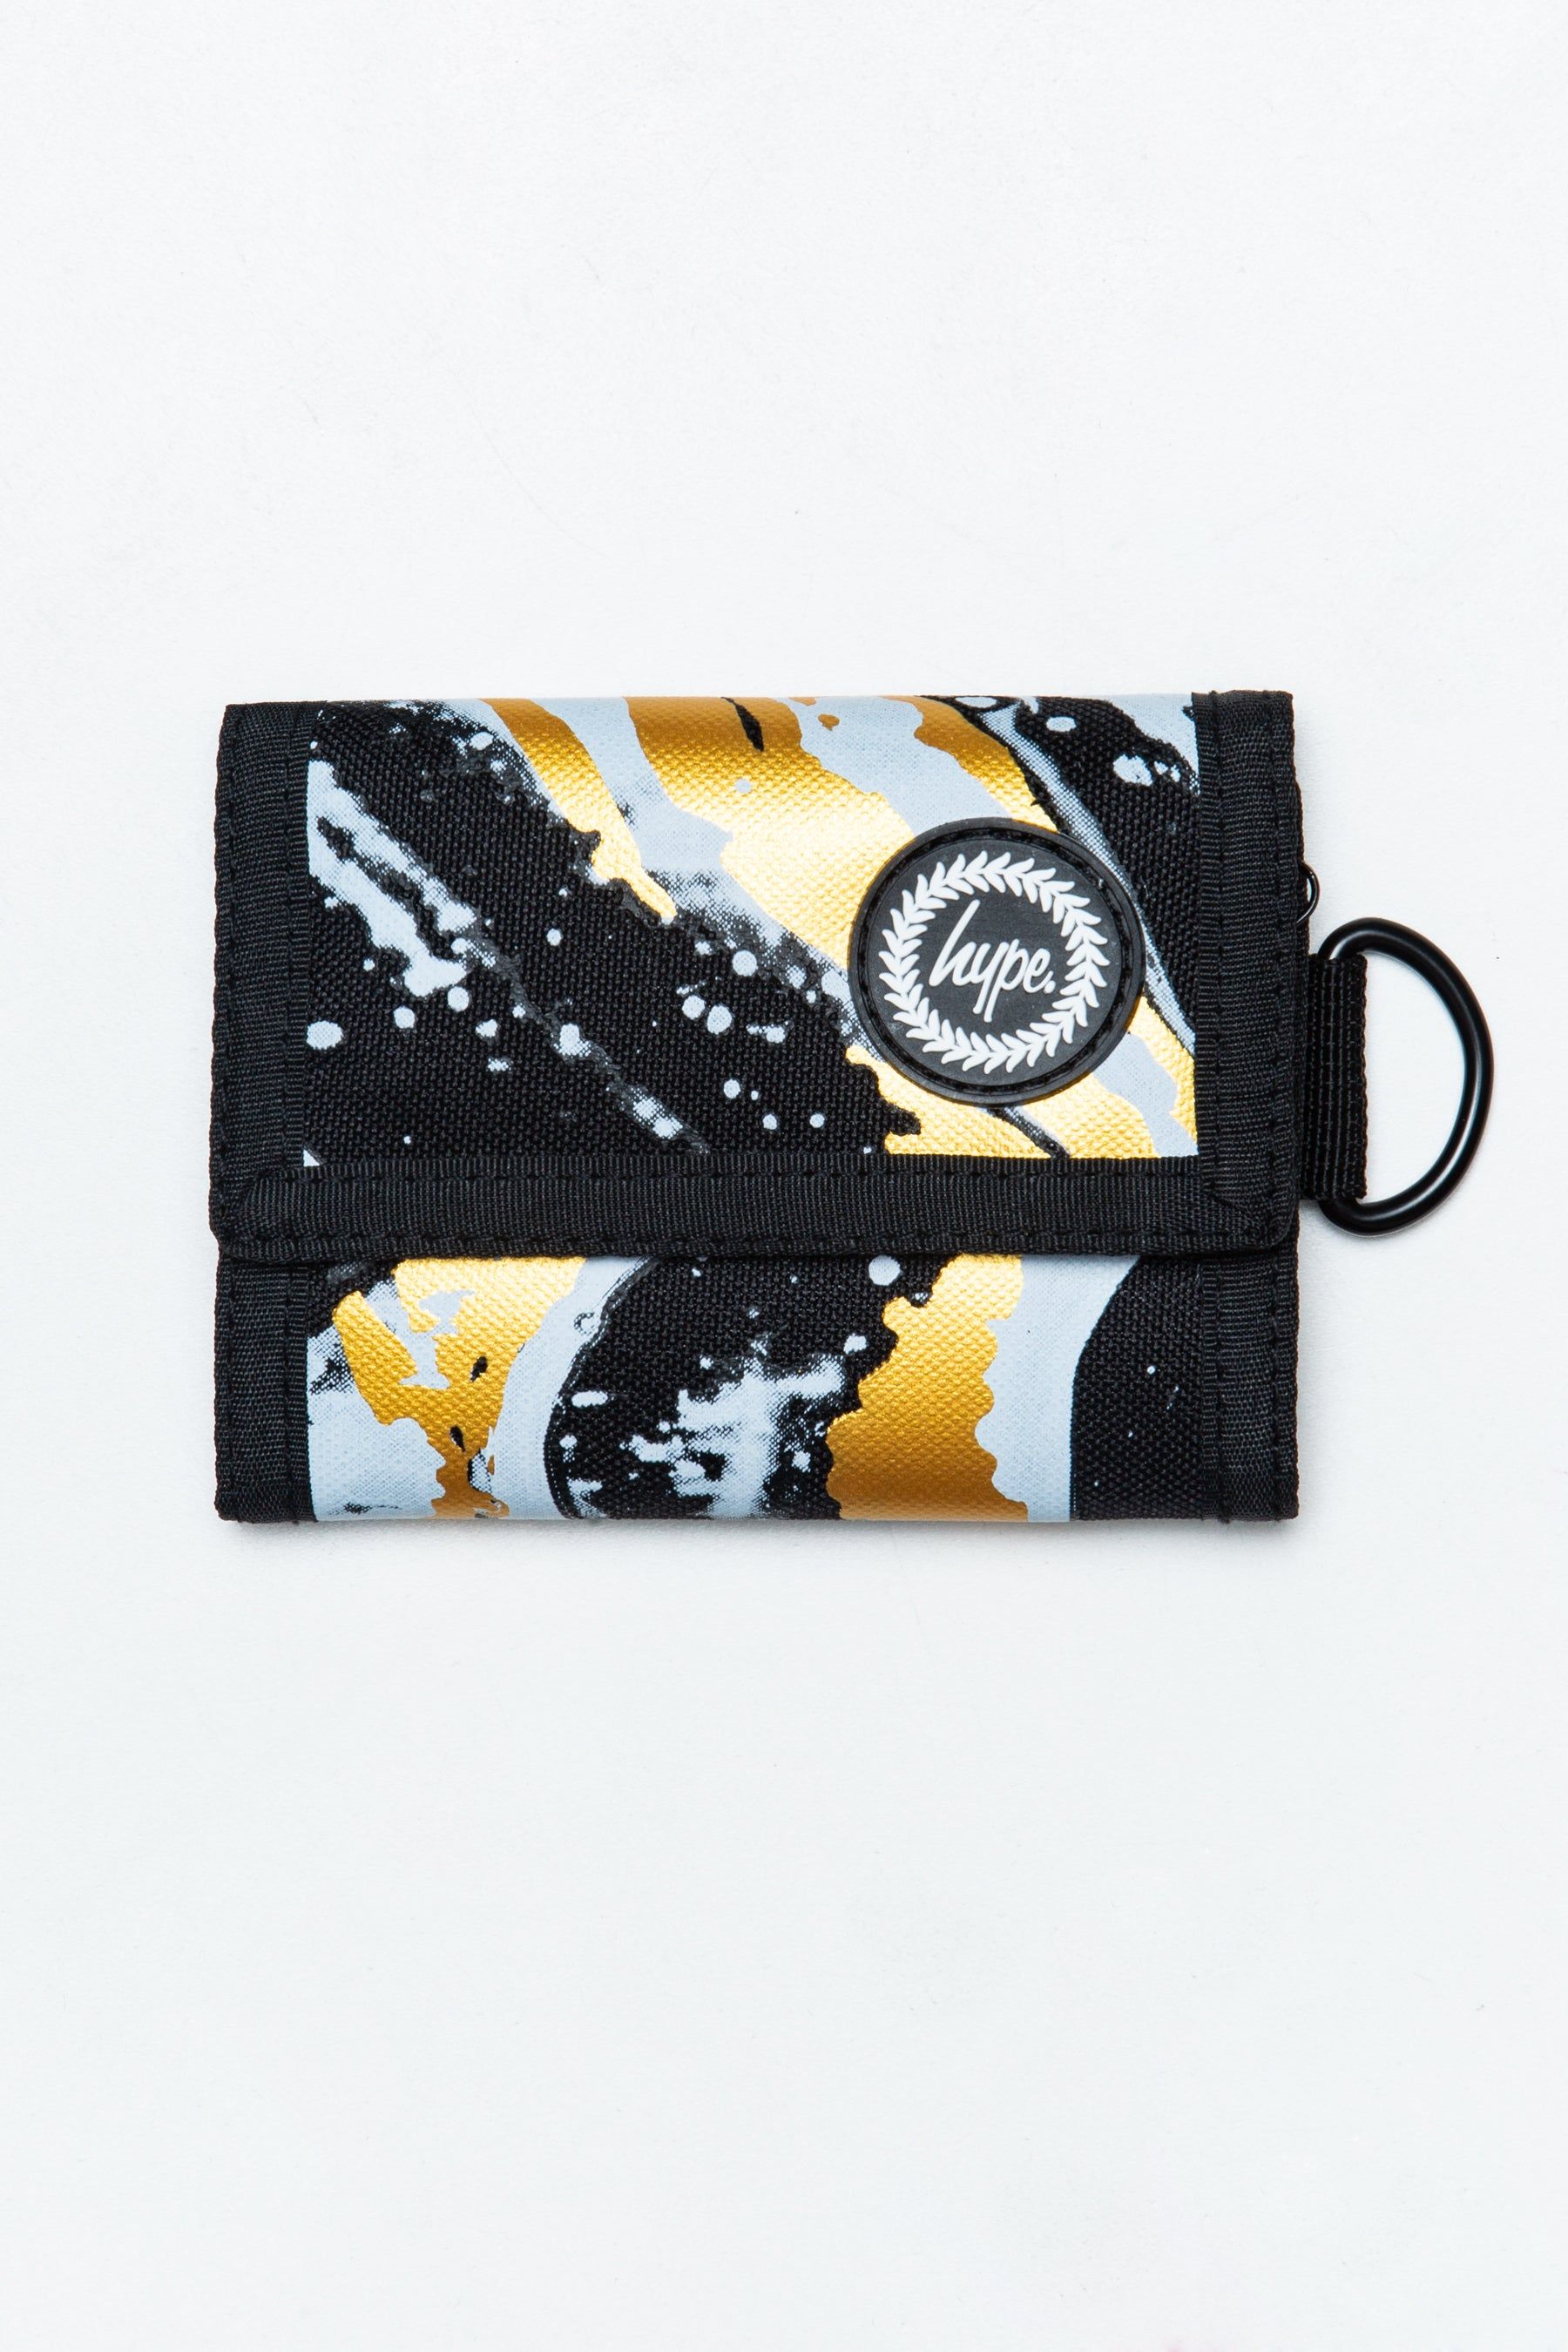 let us introduce you to the HYPE. Liquid Gold Wallet. A unisex wallet shape and design, creating the perfect lightweight wallet you need as your money and card holder. Featuring a marble inspired liquid effect in a monochrome and gold colour palette. Finished with Velcro fastening and the iconic HYPE. crest logo in a raised rubber fabric. Wipe clean only.